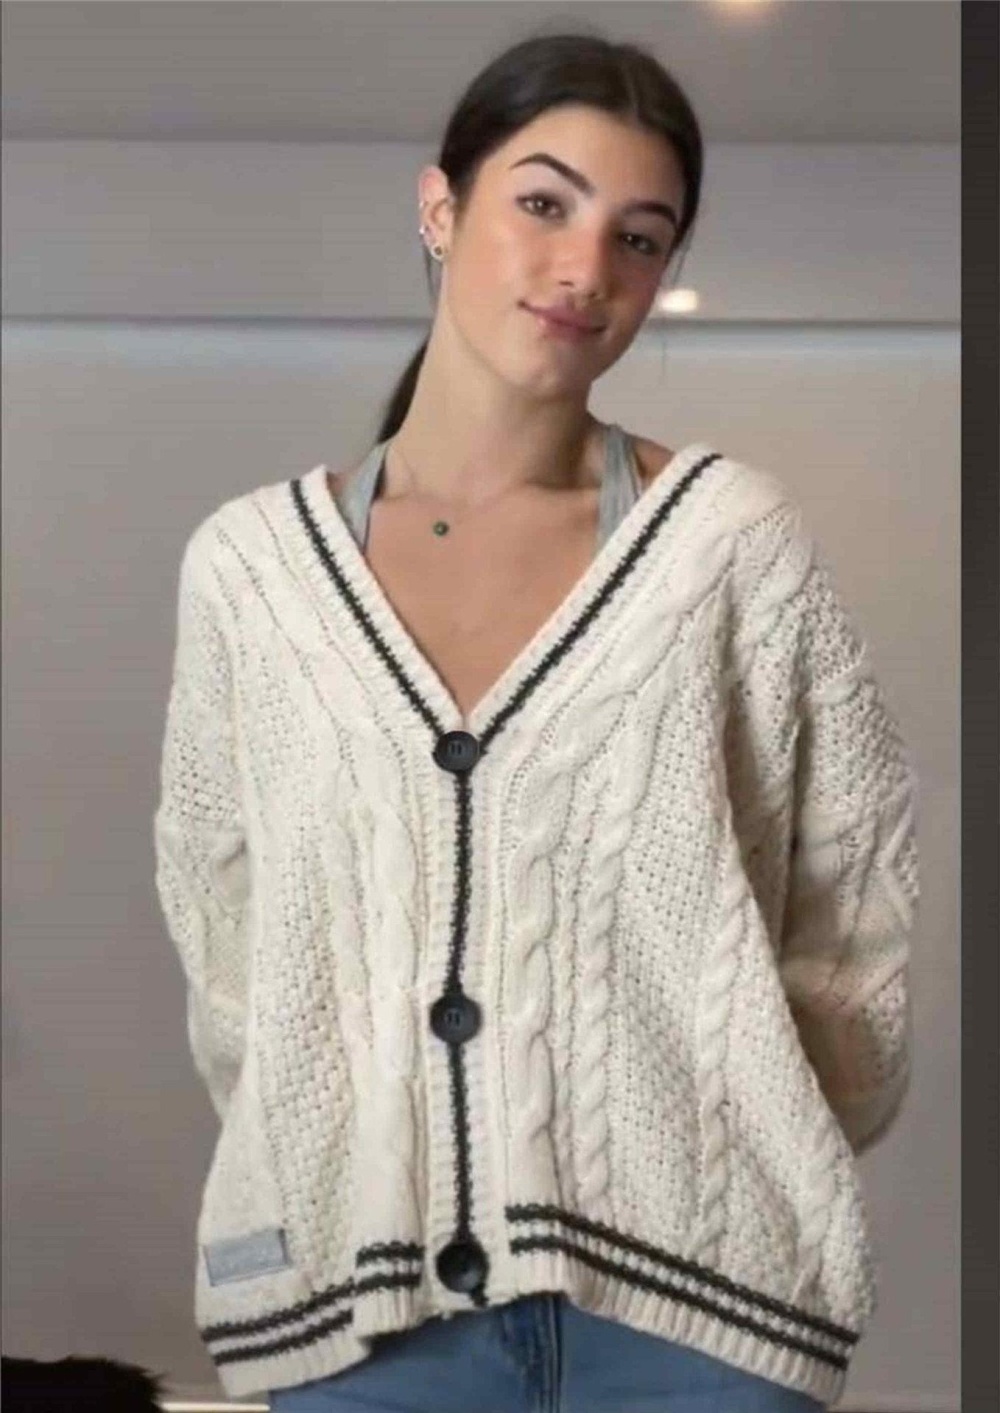 Single-breasted cardigan coat for women